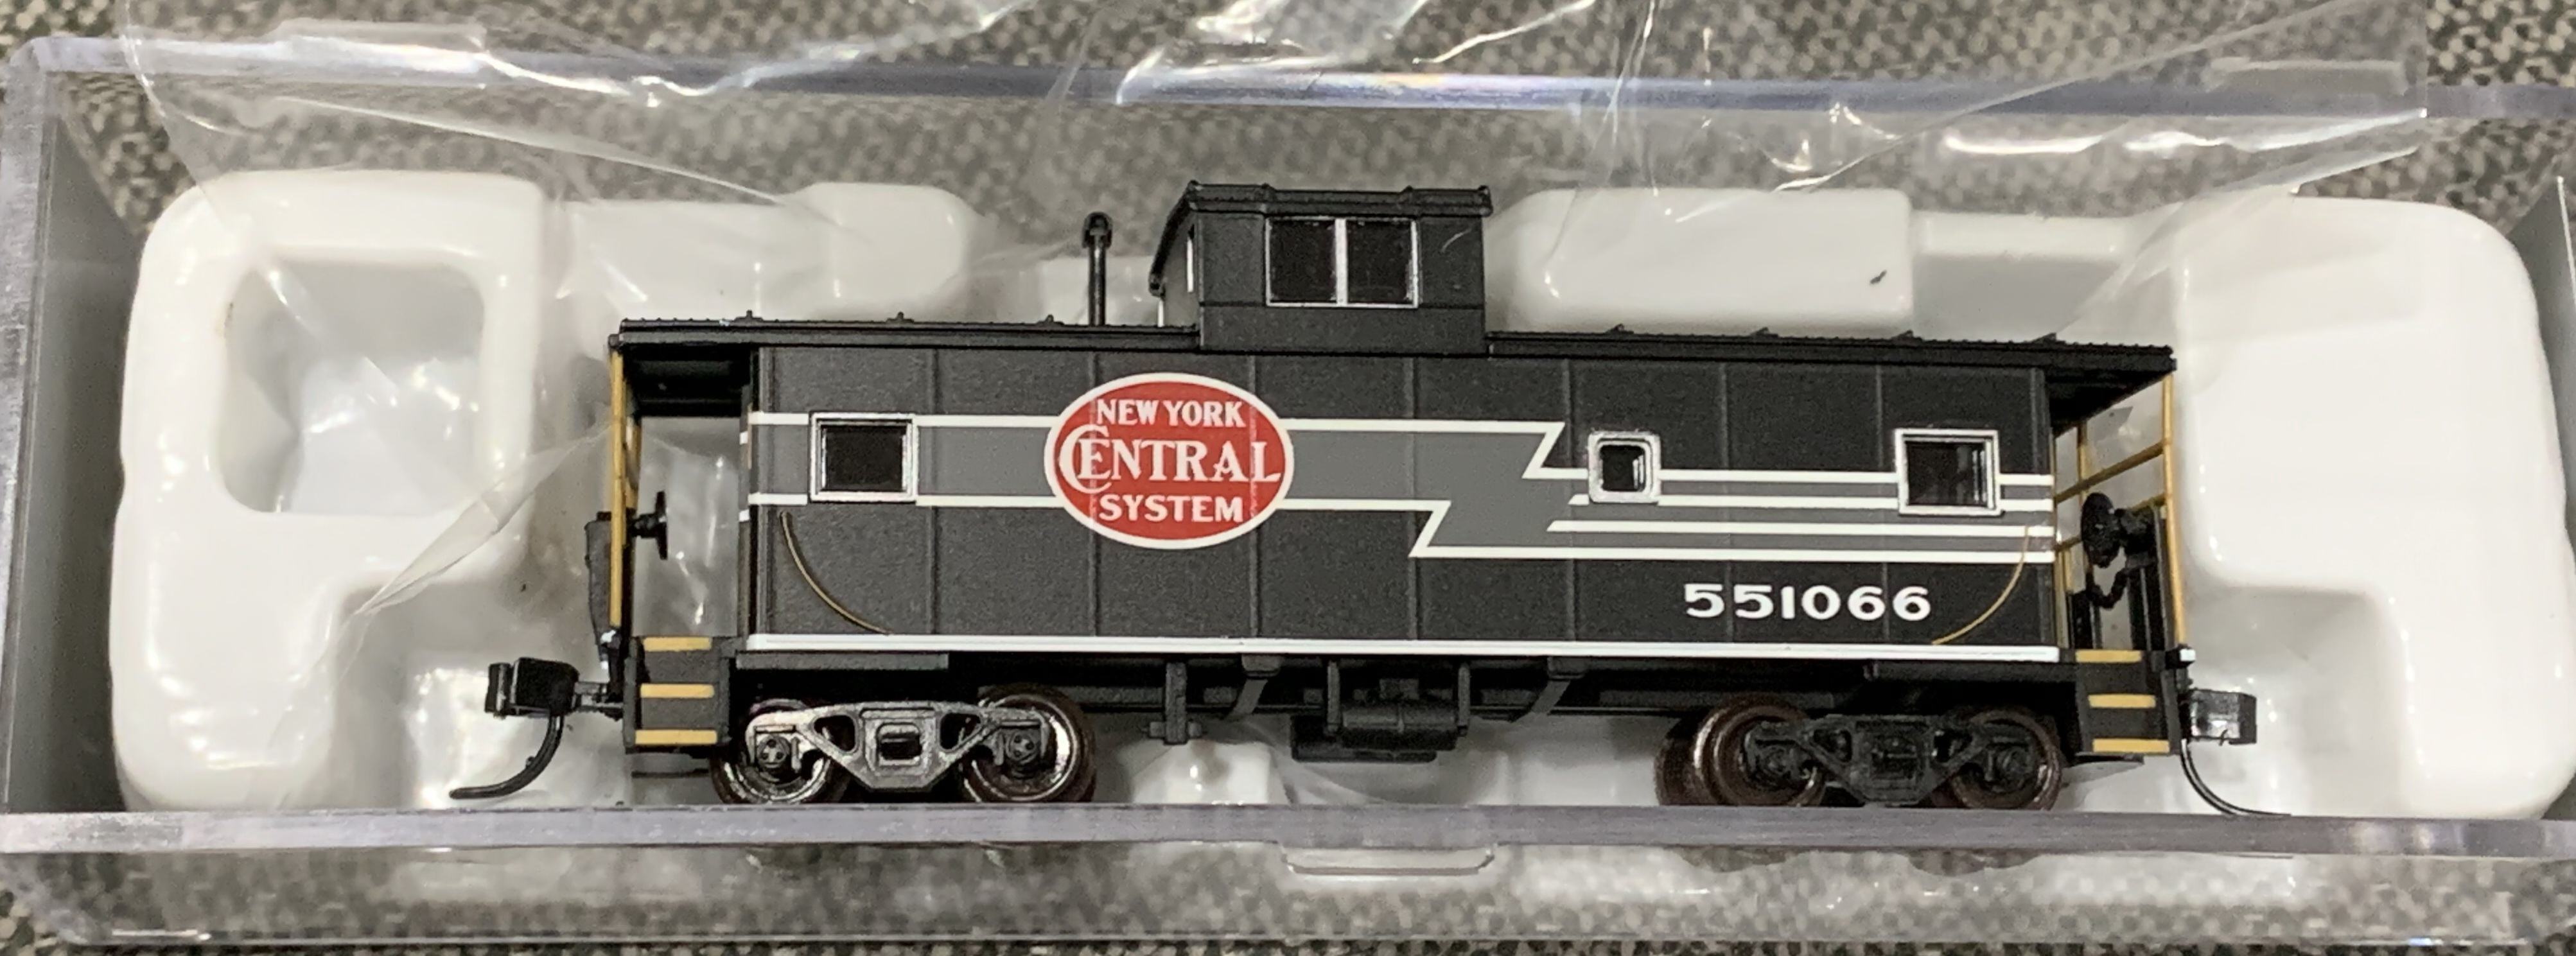 N Scale - Atlas - NSE ATL 13-21 - Caboose, Cupola, Steel - New York Central - 551066